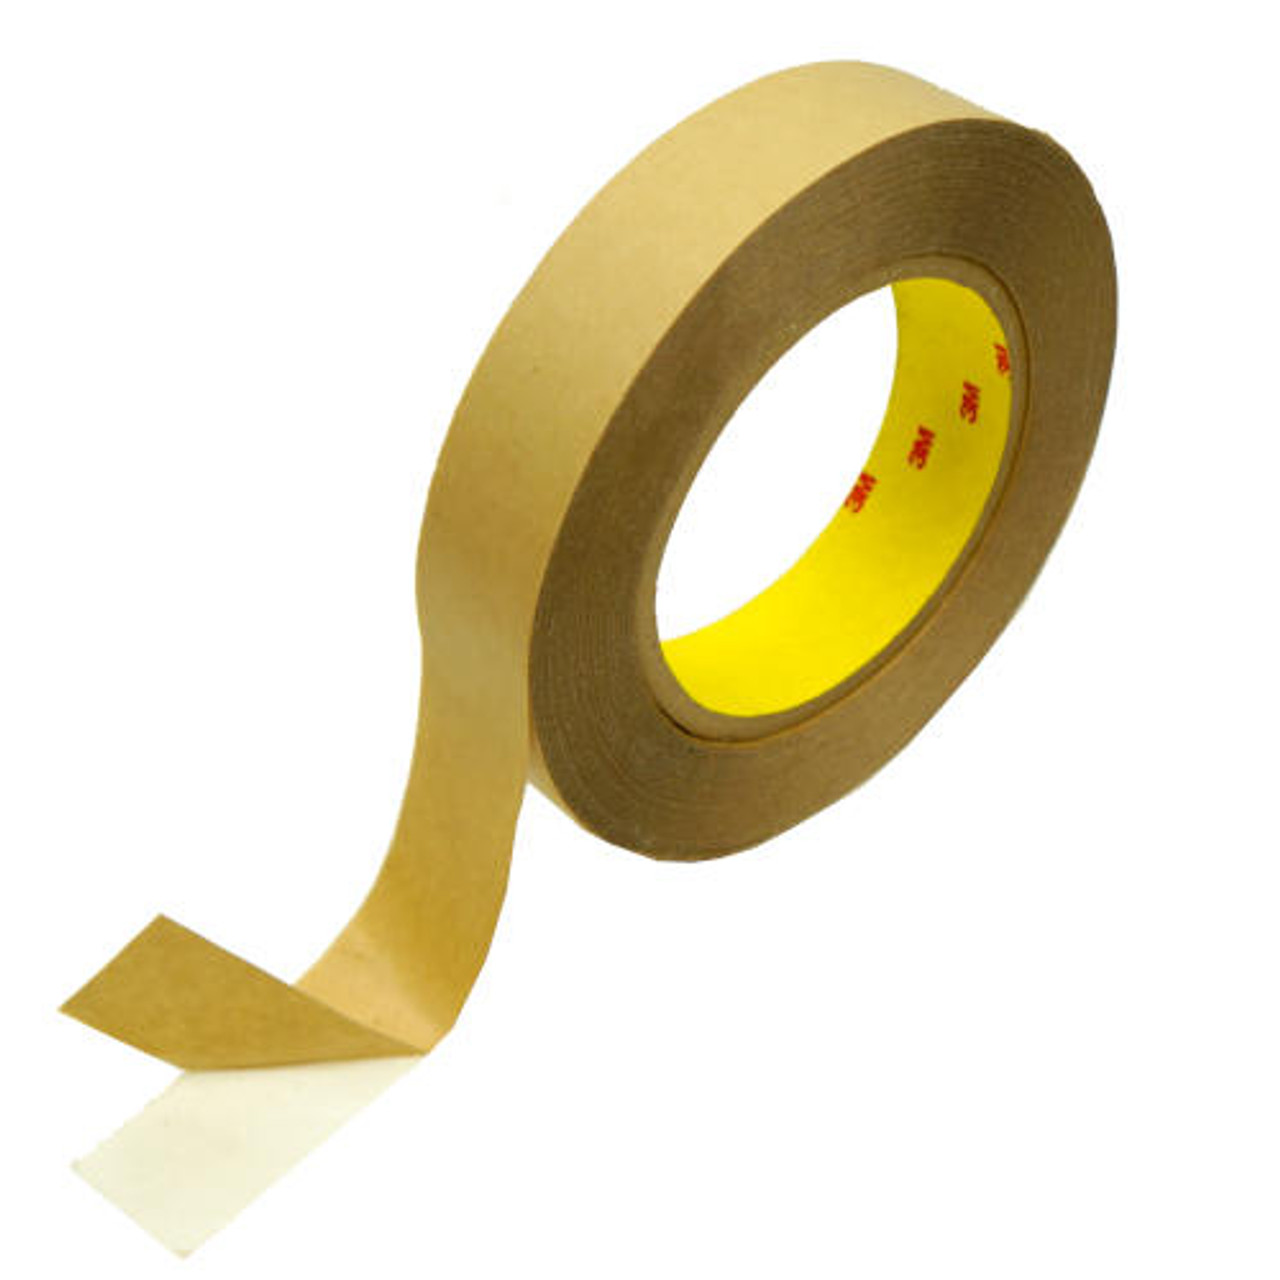 3M Double-Sided Translucent Tape